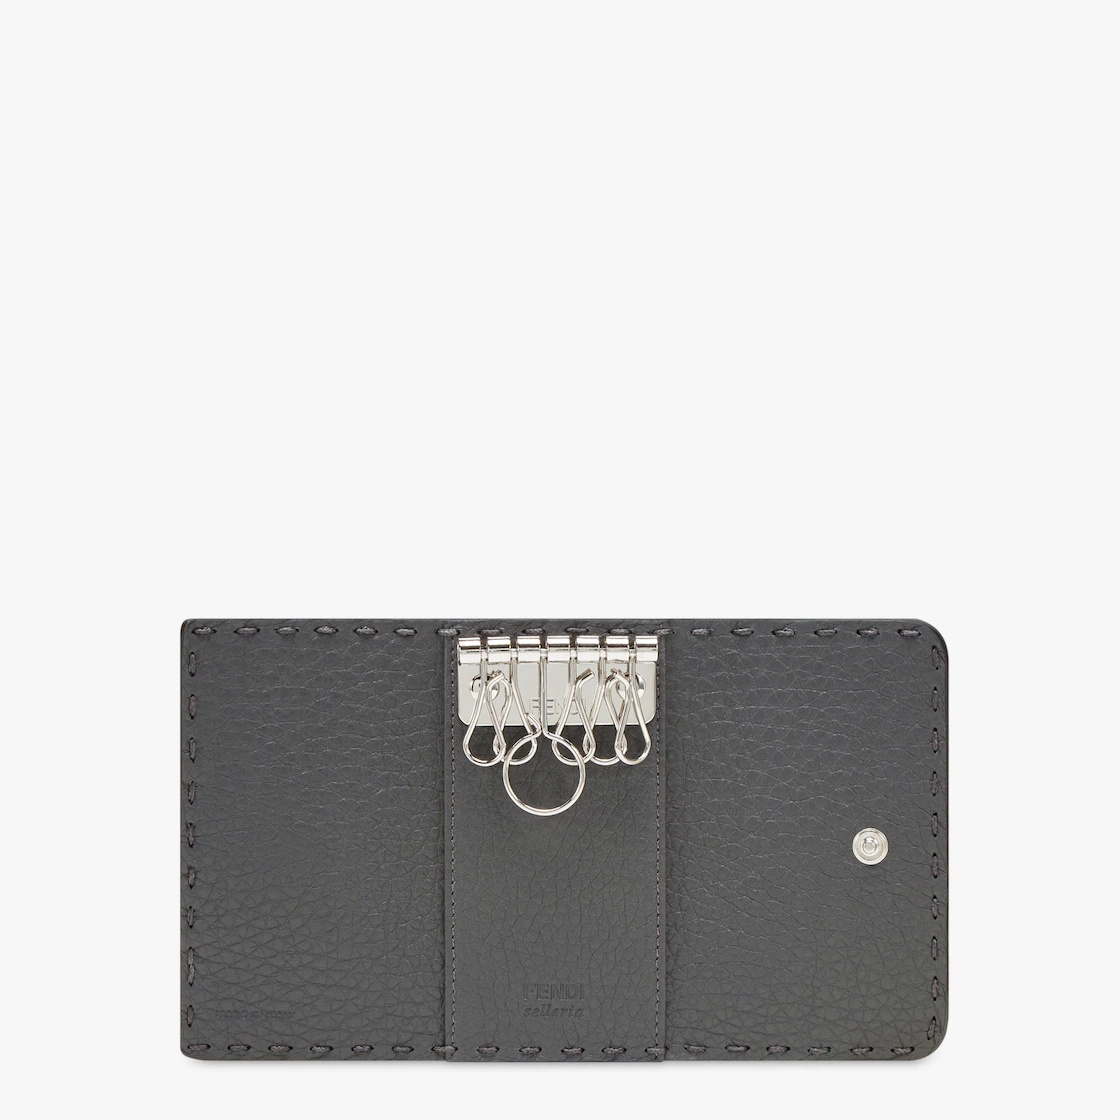 Tri-fold pouch with internal key ring. Press-stud fastening. Made of gray Roman leather. Branded wit - 3